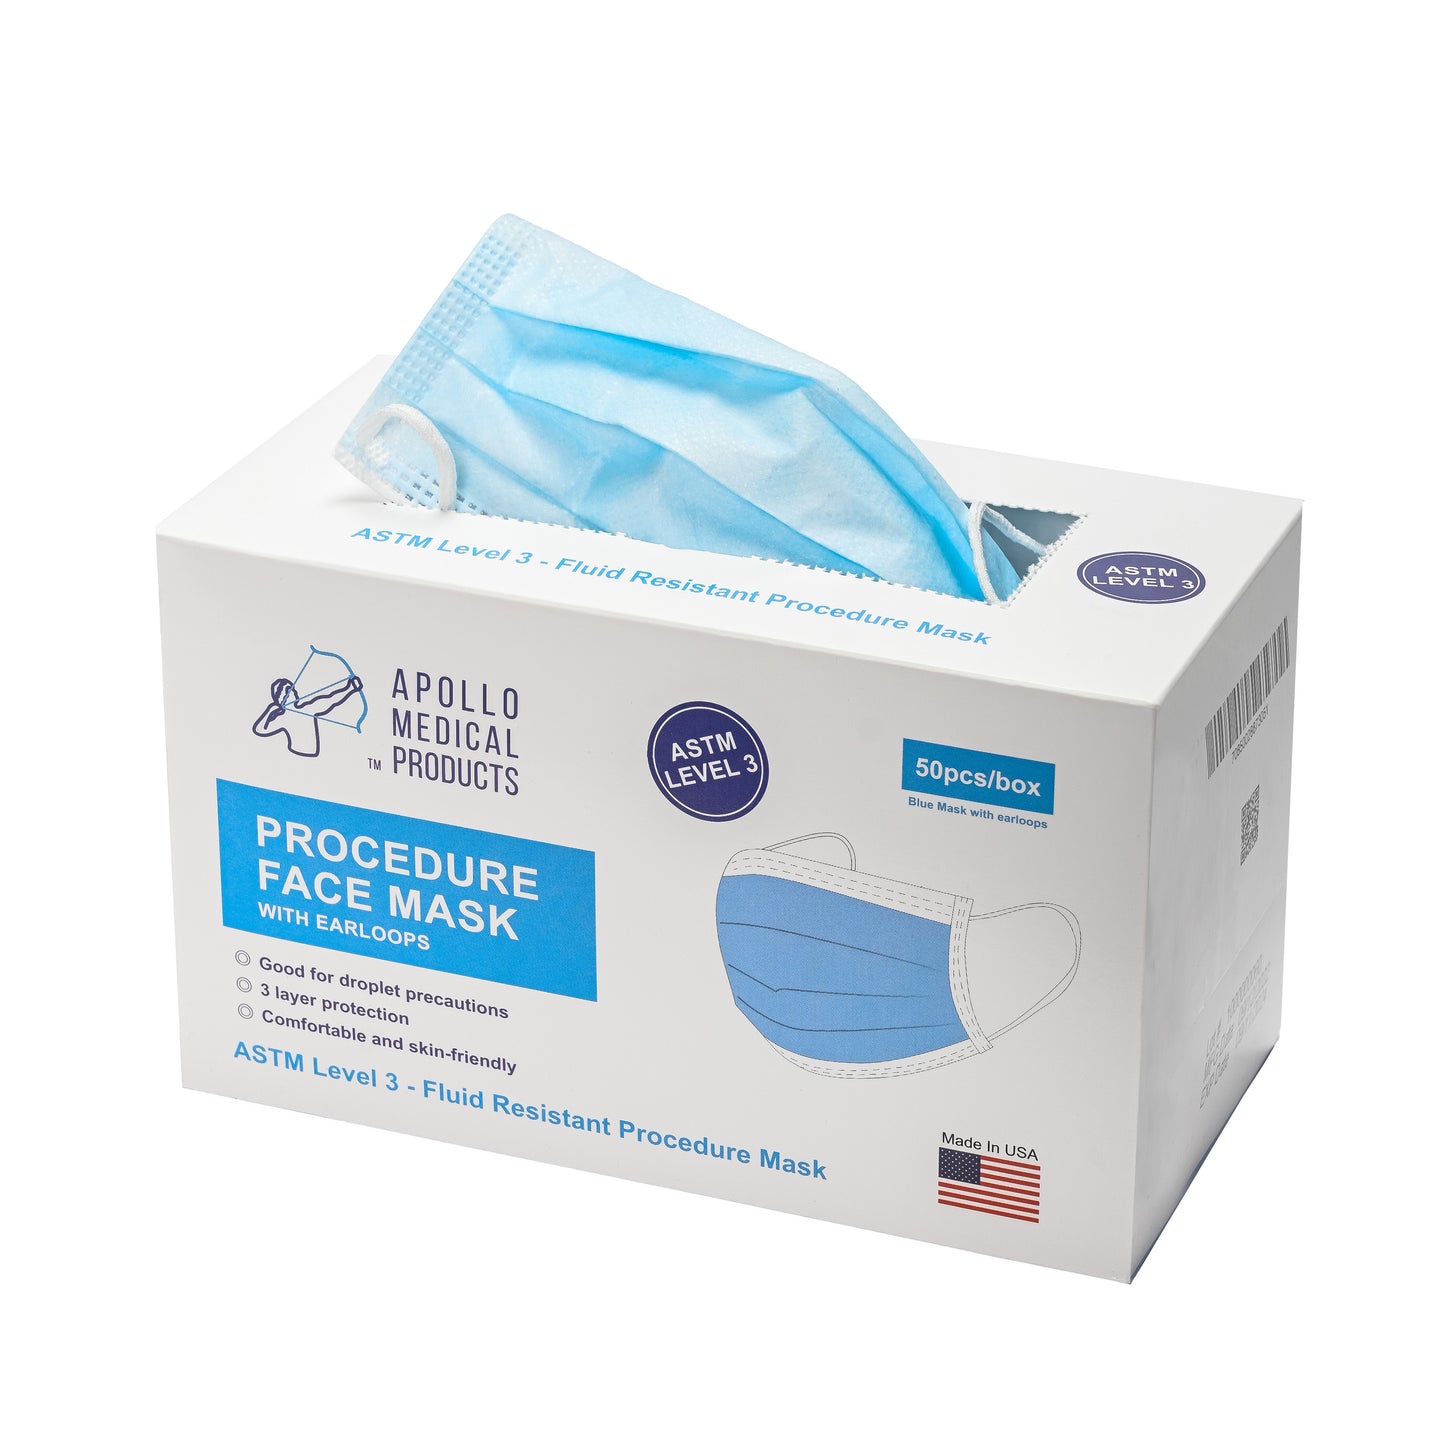 Level 3, Procedure Mask, Blue, Box of 50, Case of 40, Made in USA